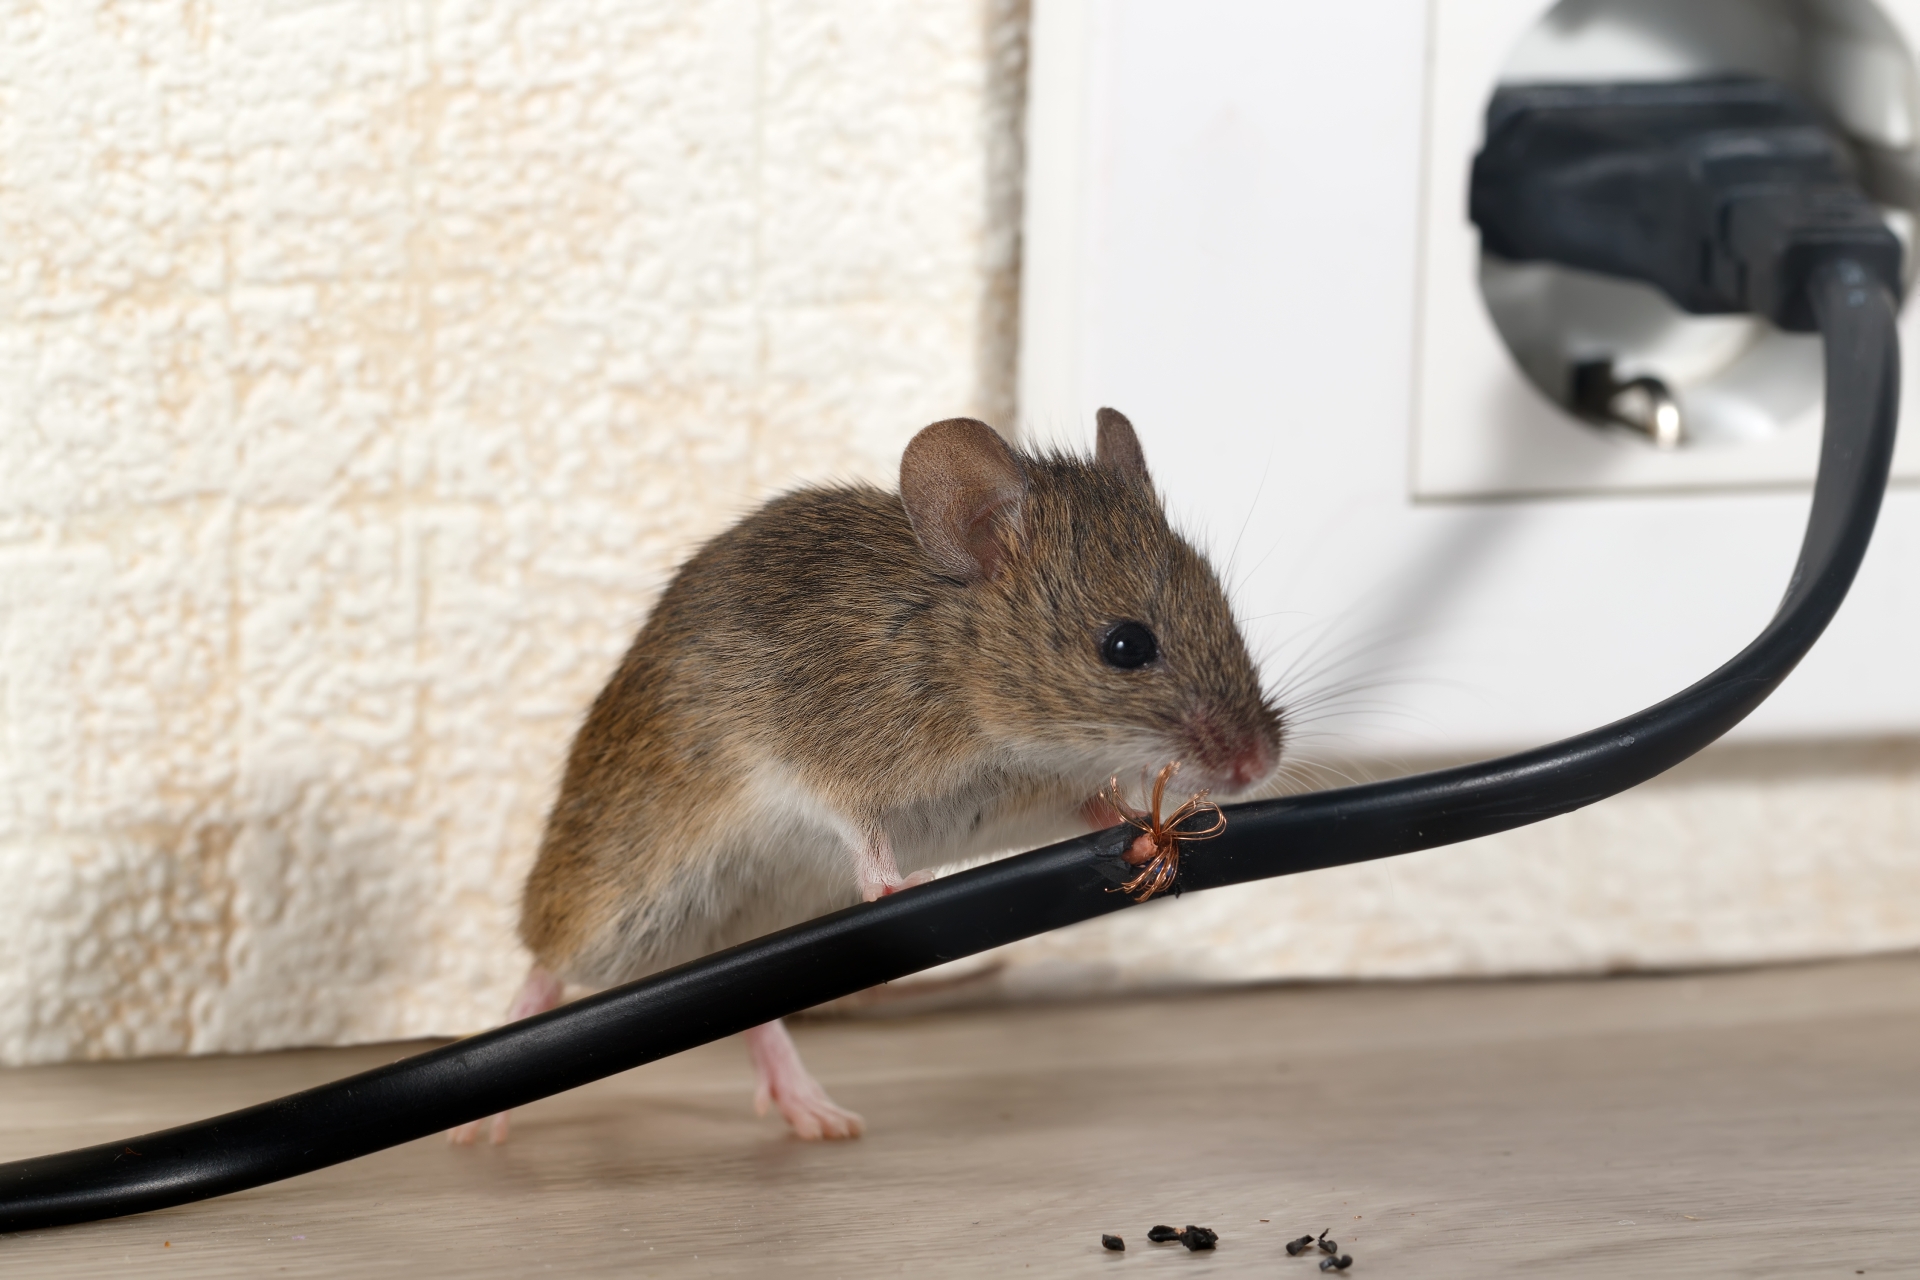 Mice Infestation, Pest Control in Tadworth, Kingswood, Mogador, KT20. Call Now 020 8166 9746